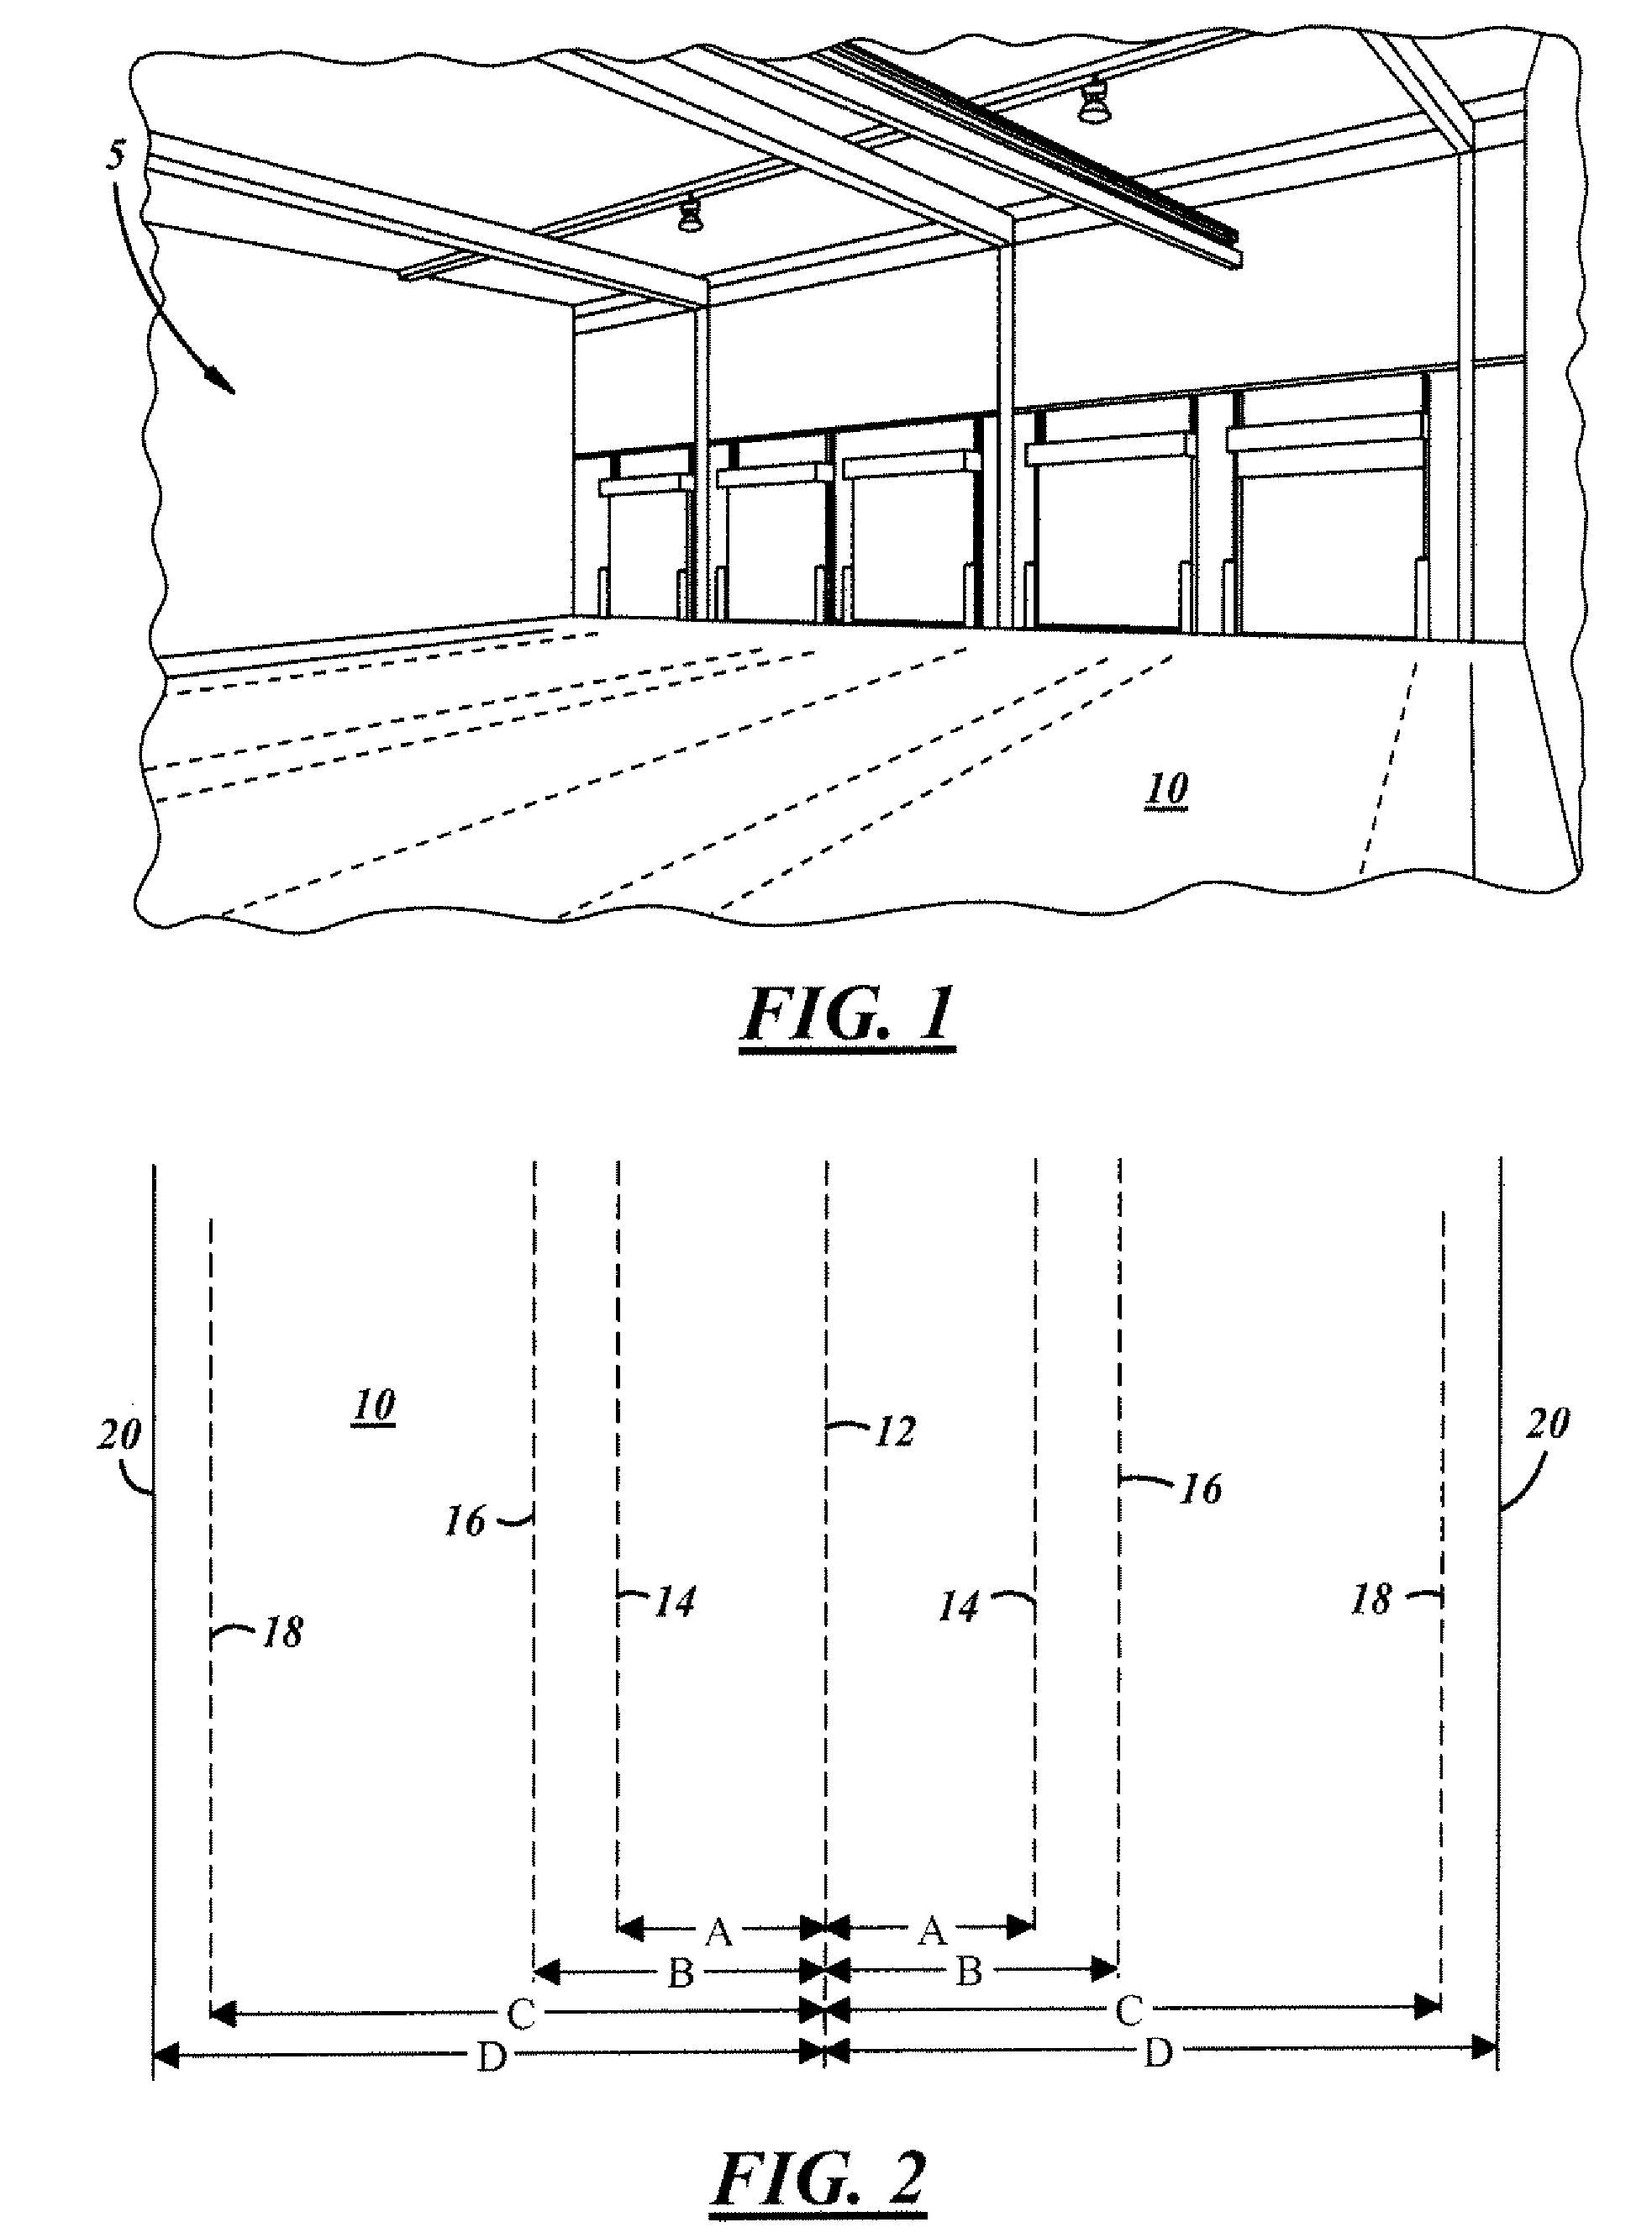 Method and apparatus for pre-fabricating a synthetic sports field